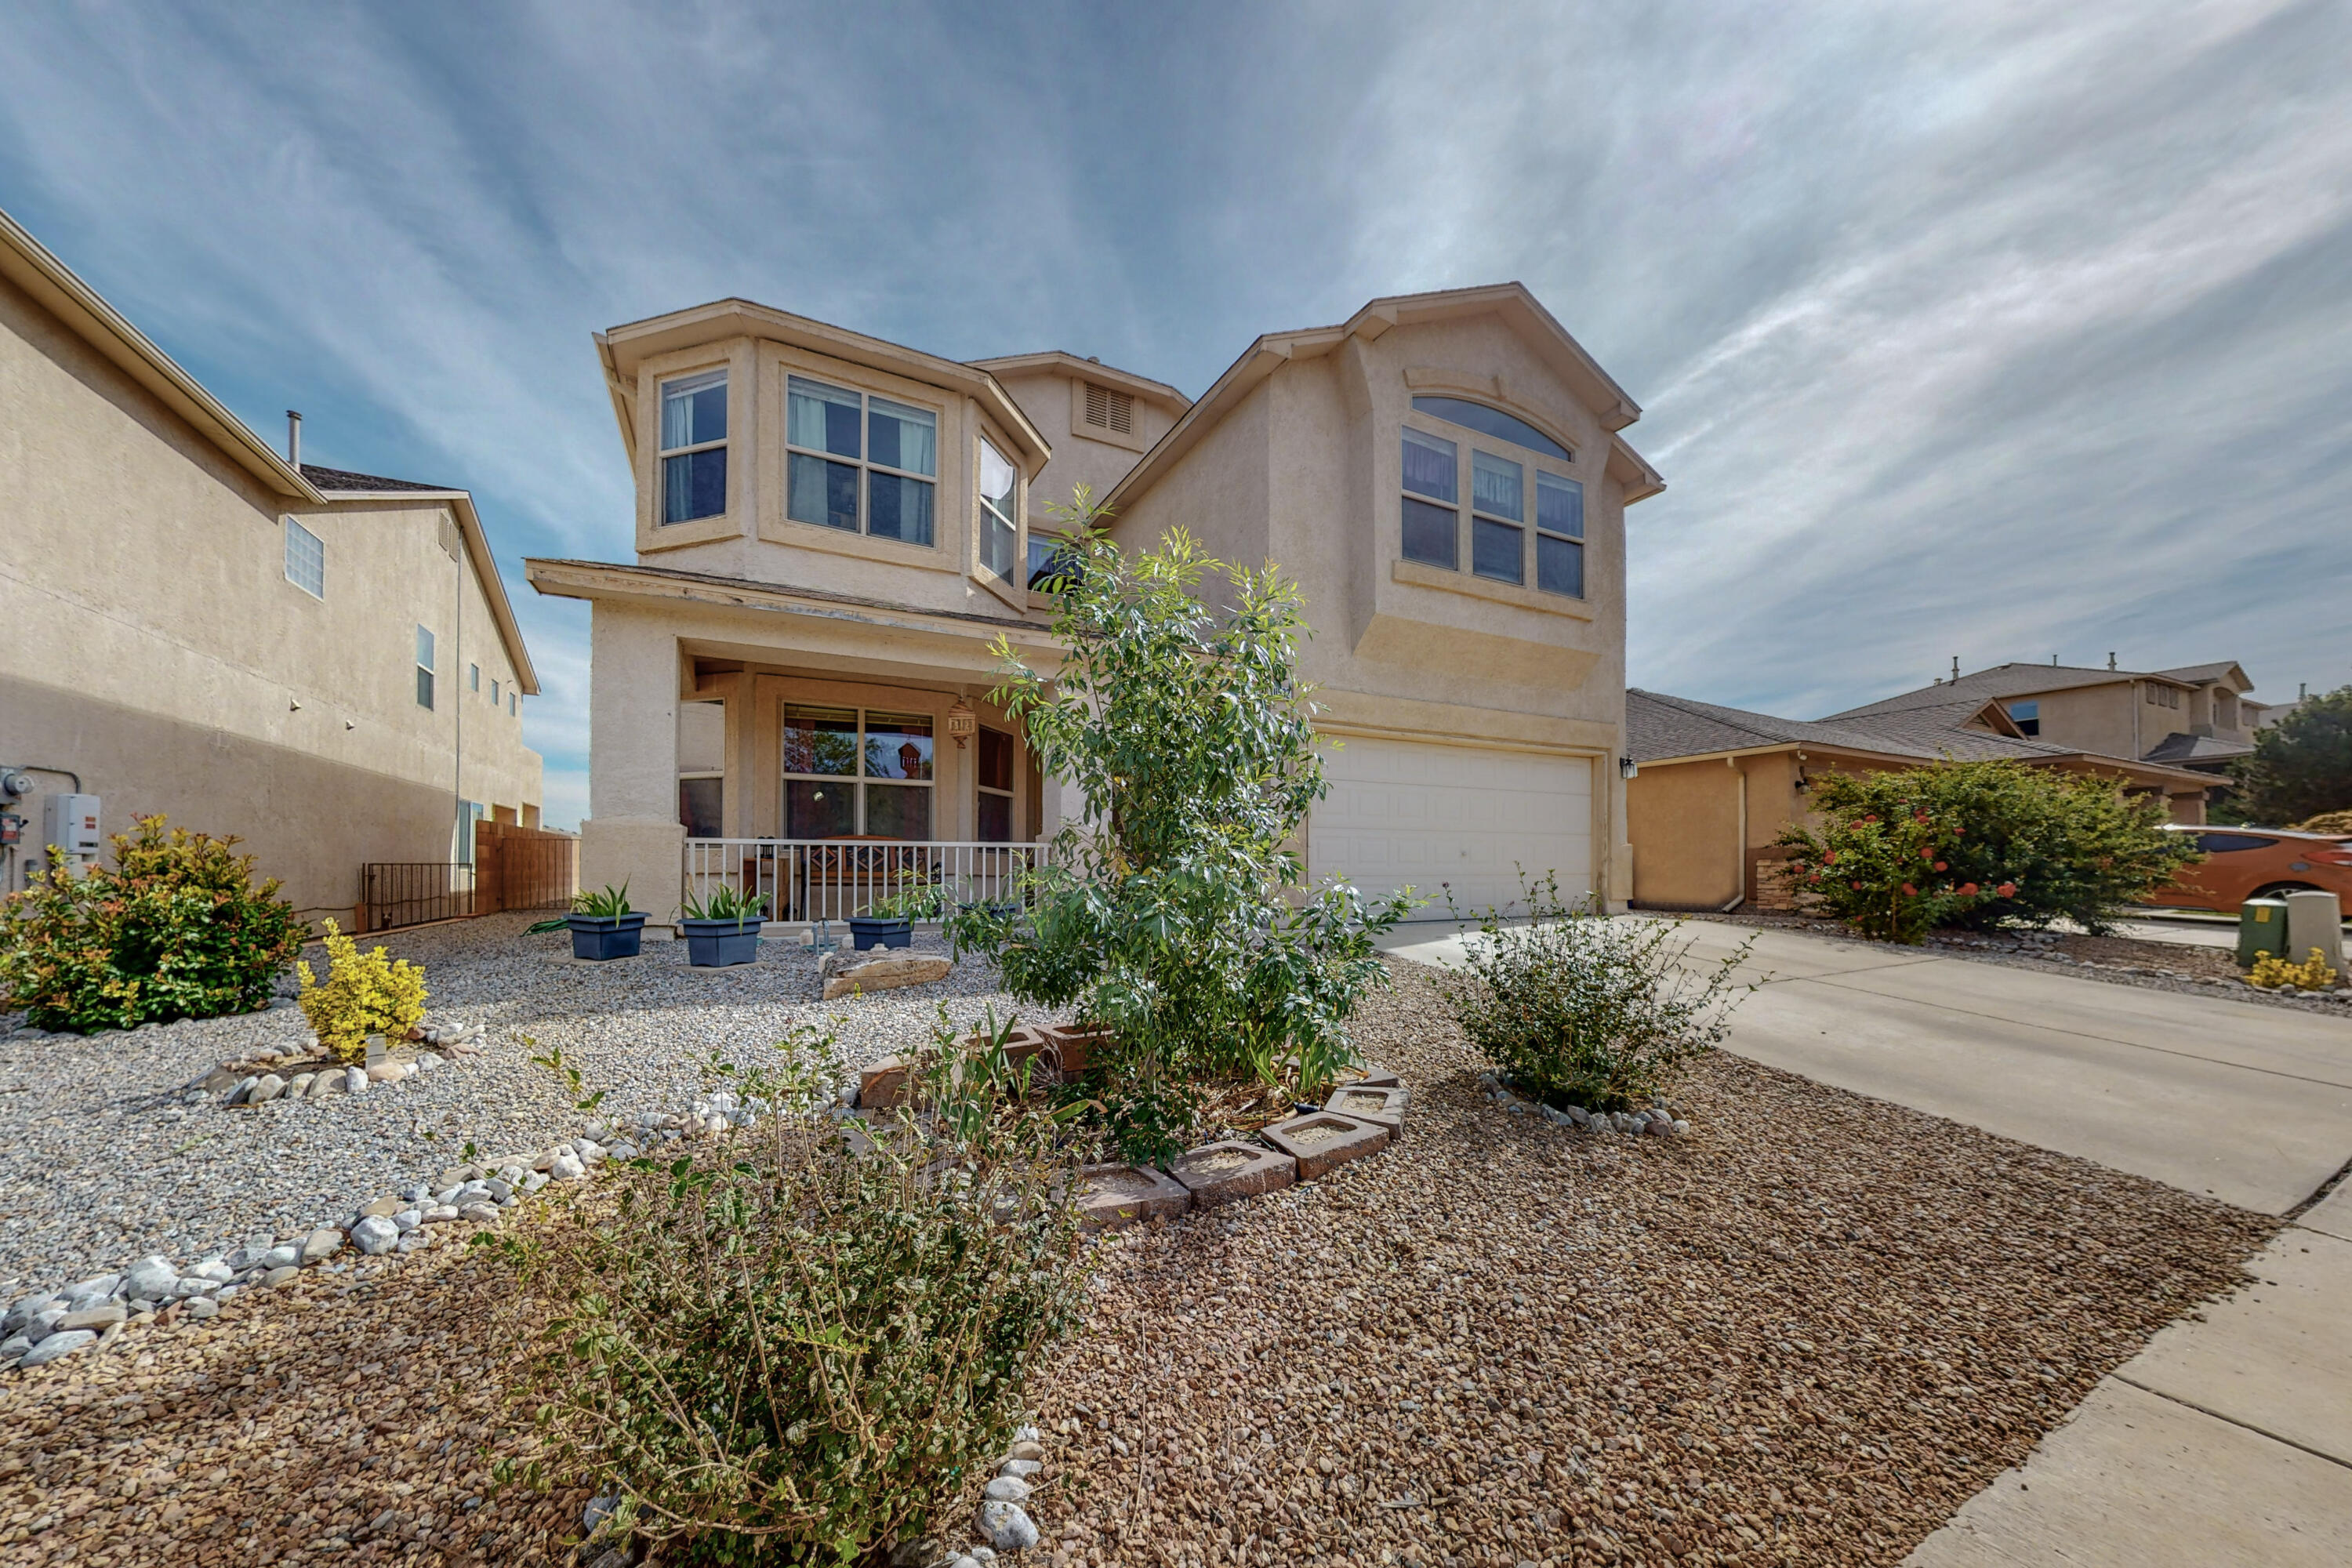 Welcome Home! This gem in the heart of Ventana Ranch West is just what you've been looking for. 4 large Bedrooms, 2 and a half bath, 2 living spaces, 2 car garage, large landscaped backyard, and on a quiet culdesac street. Near a beautiful big park and walking trails. Refrigerated air conditioning!